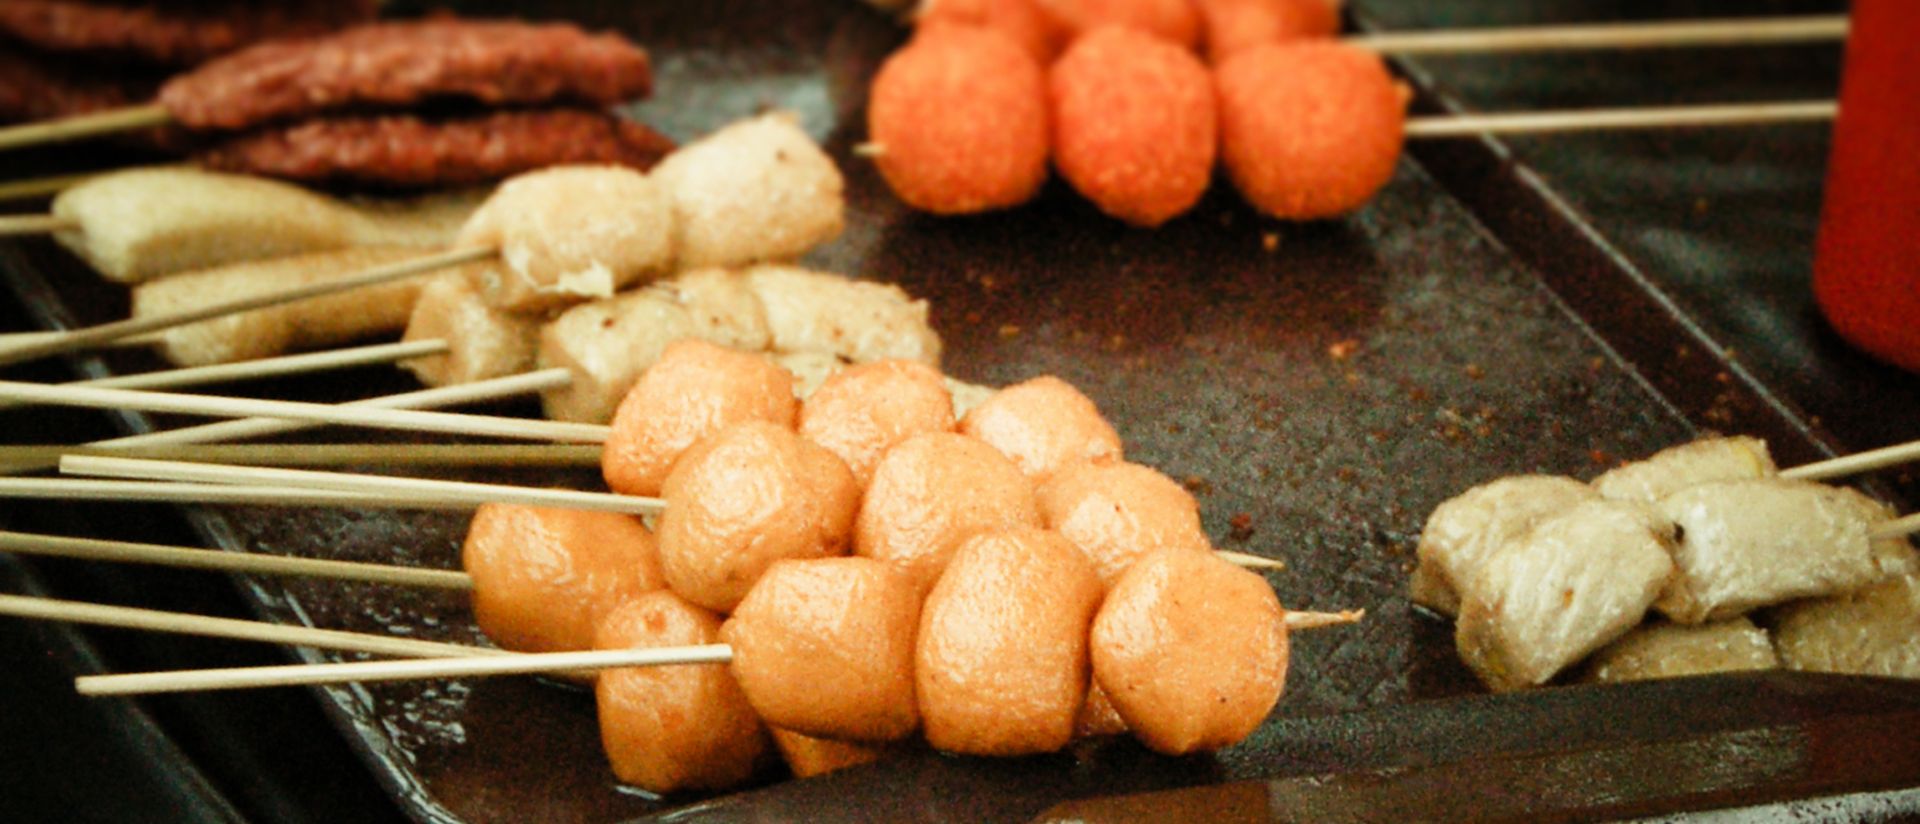 Image of various traditional street food items on a stick